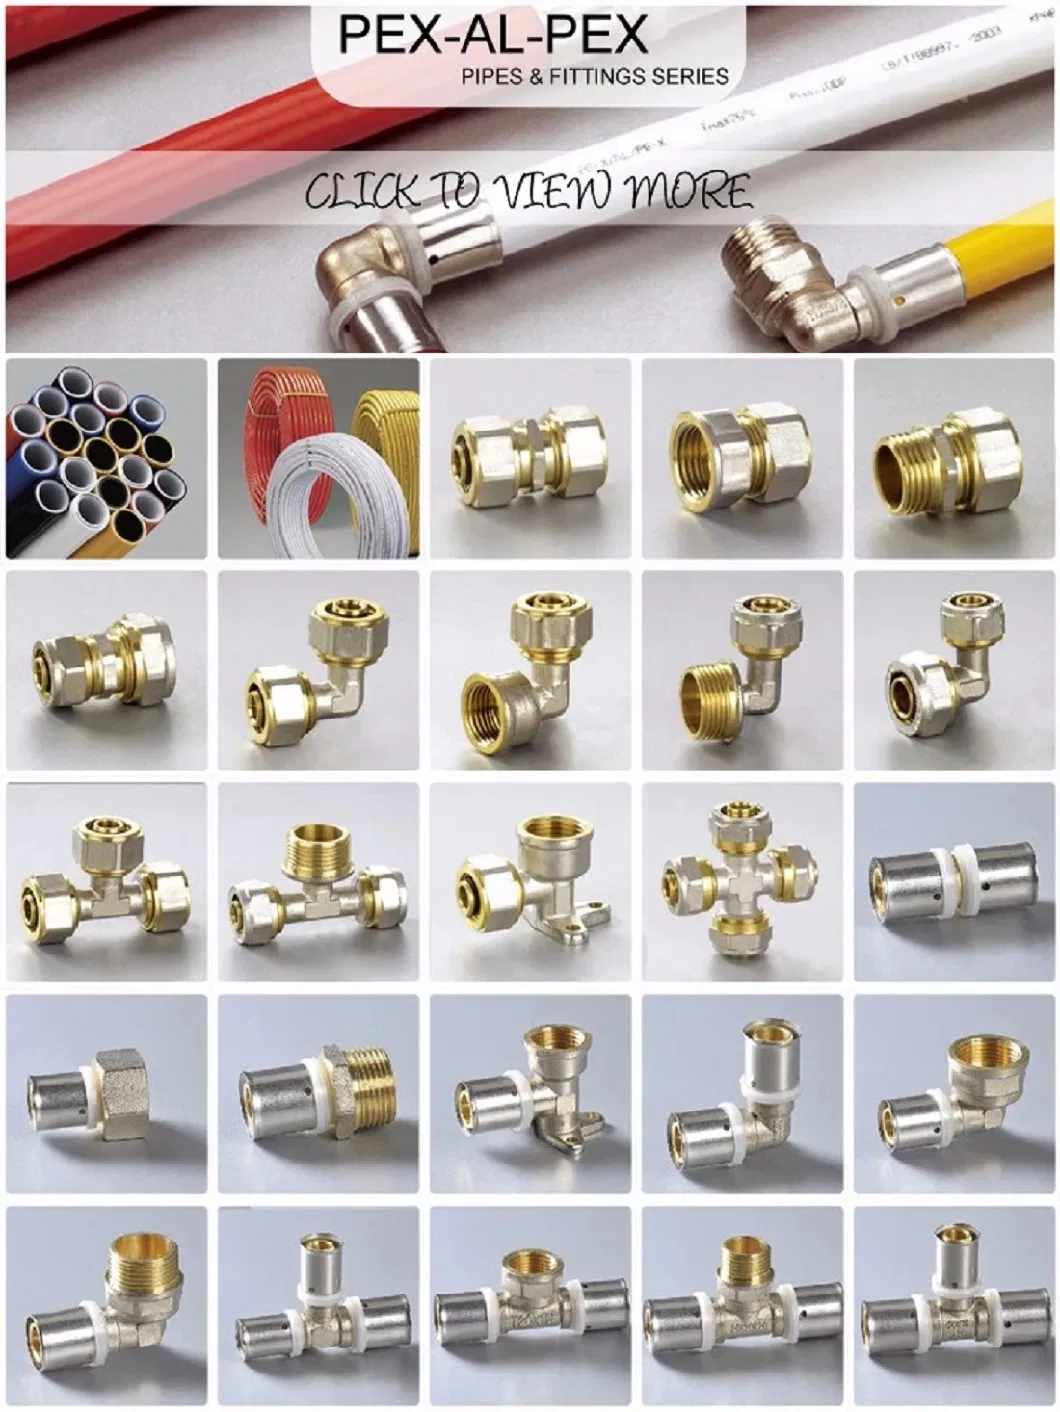 12 PCS Pex Fittings 1/2 Inch Straight Coupling Push Fit Pex Fittings, Push-to-Connect Copper, CPVC, No Pb Brass Plumbing Fittings (12PCS 1/2&quot;))